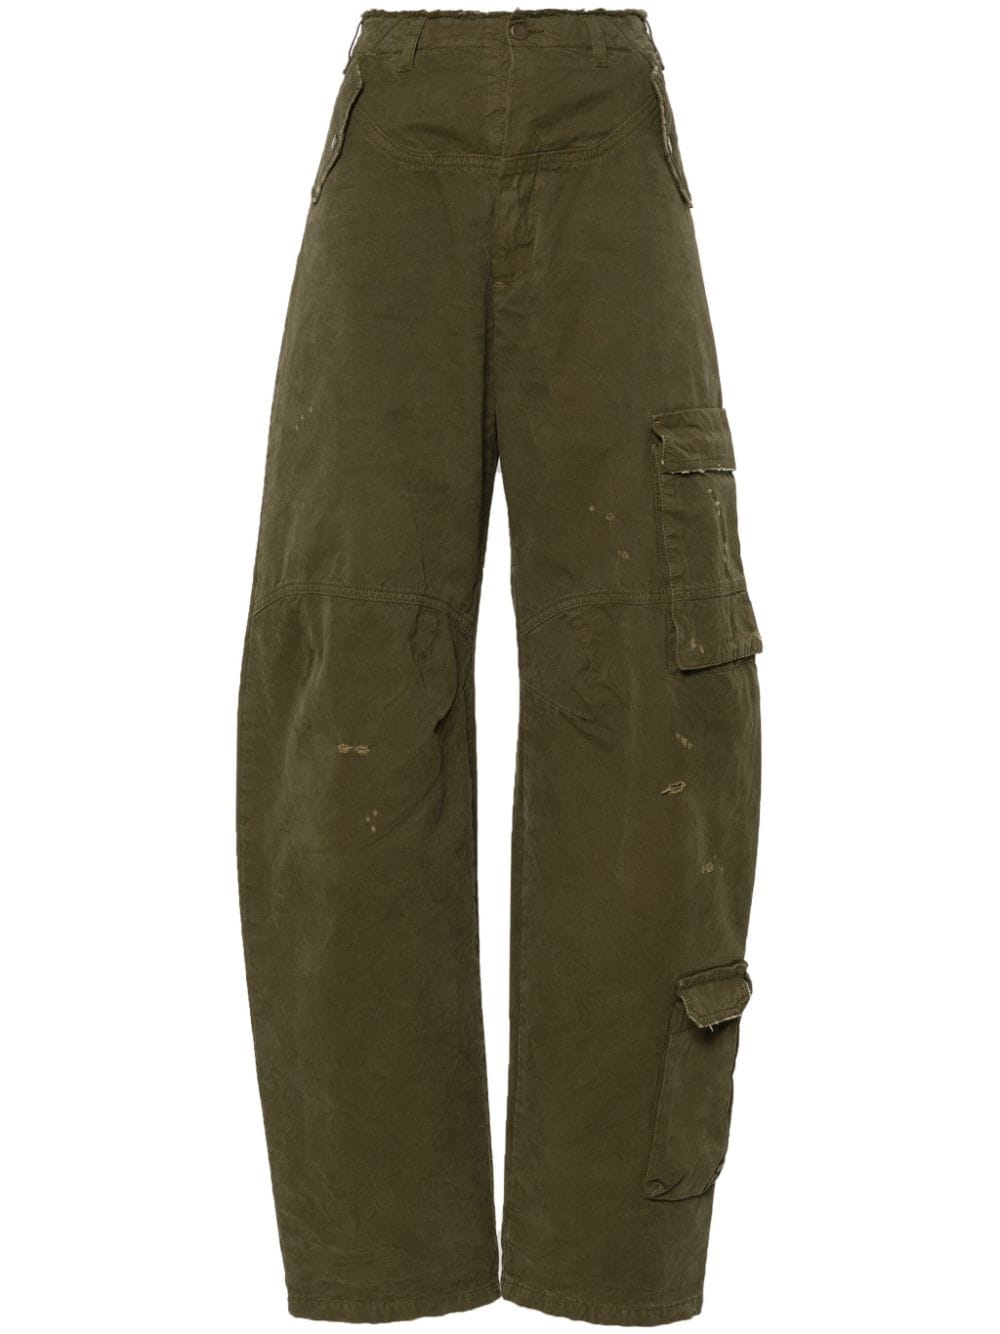 TROUSERS - Clothing - WOMEN